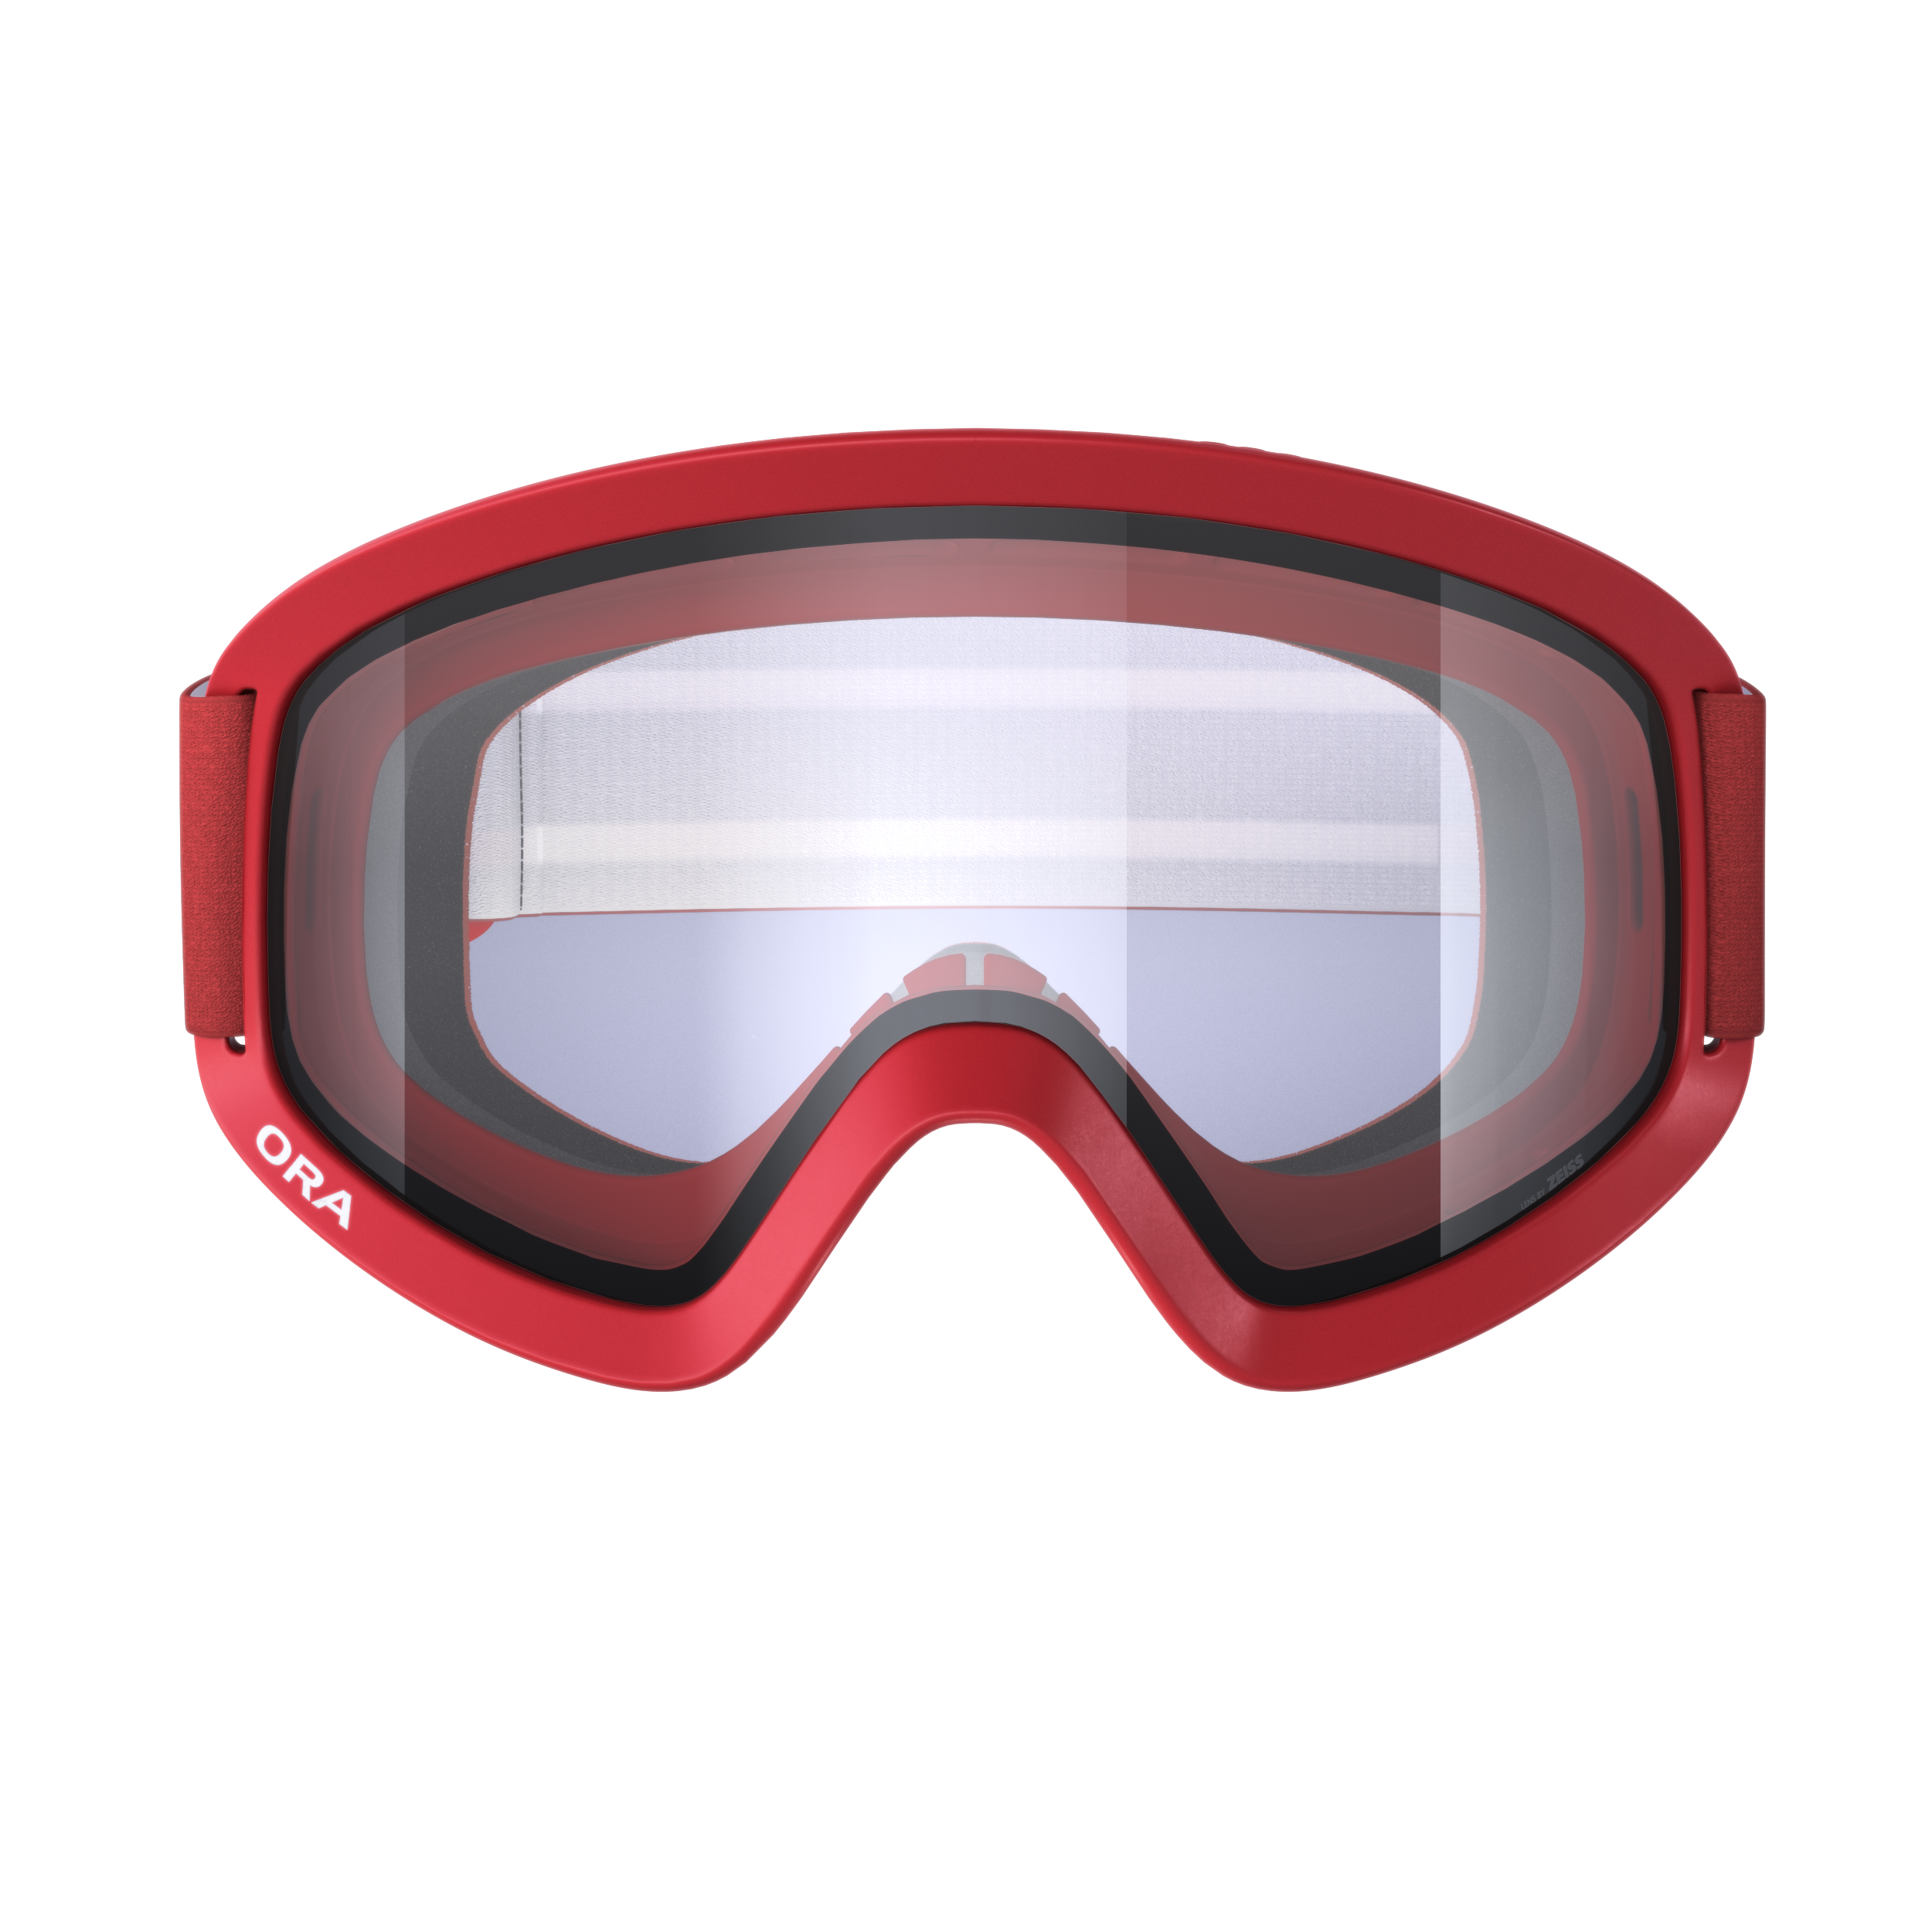 POC Ora Downhill MTB Goggles - Mountain Kids Outfitters: Prismane Red, Front View